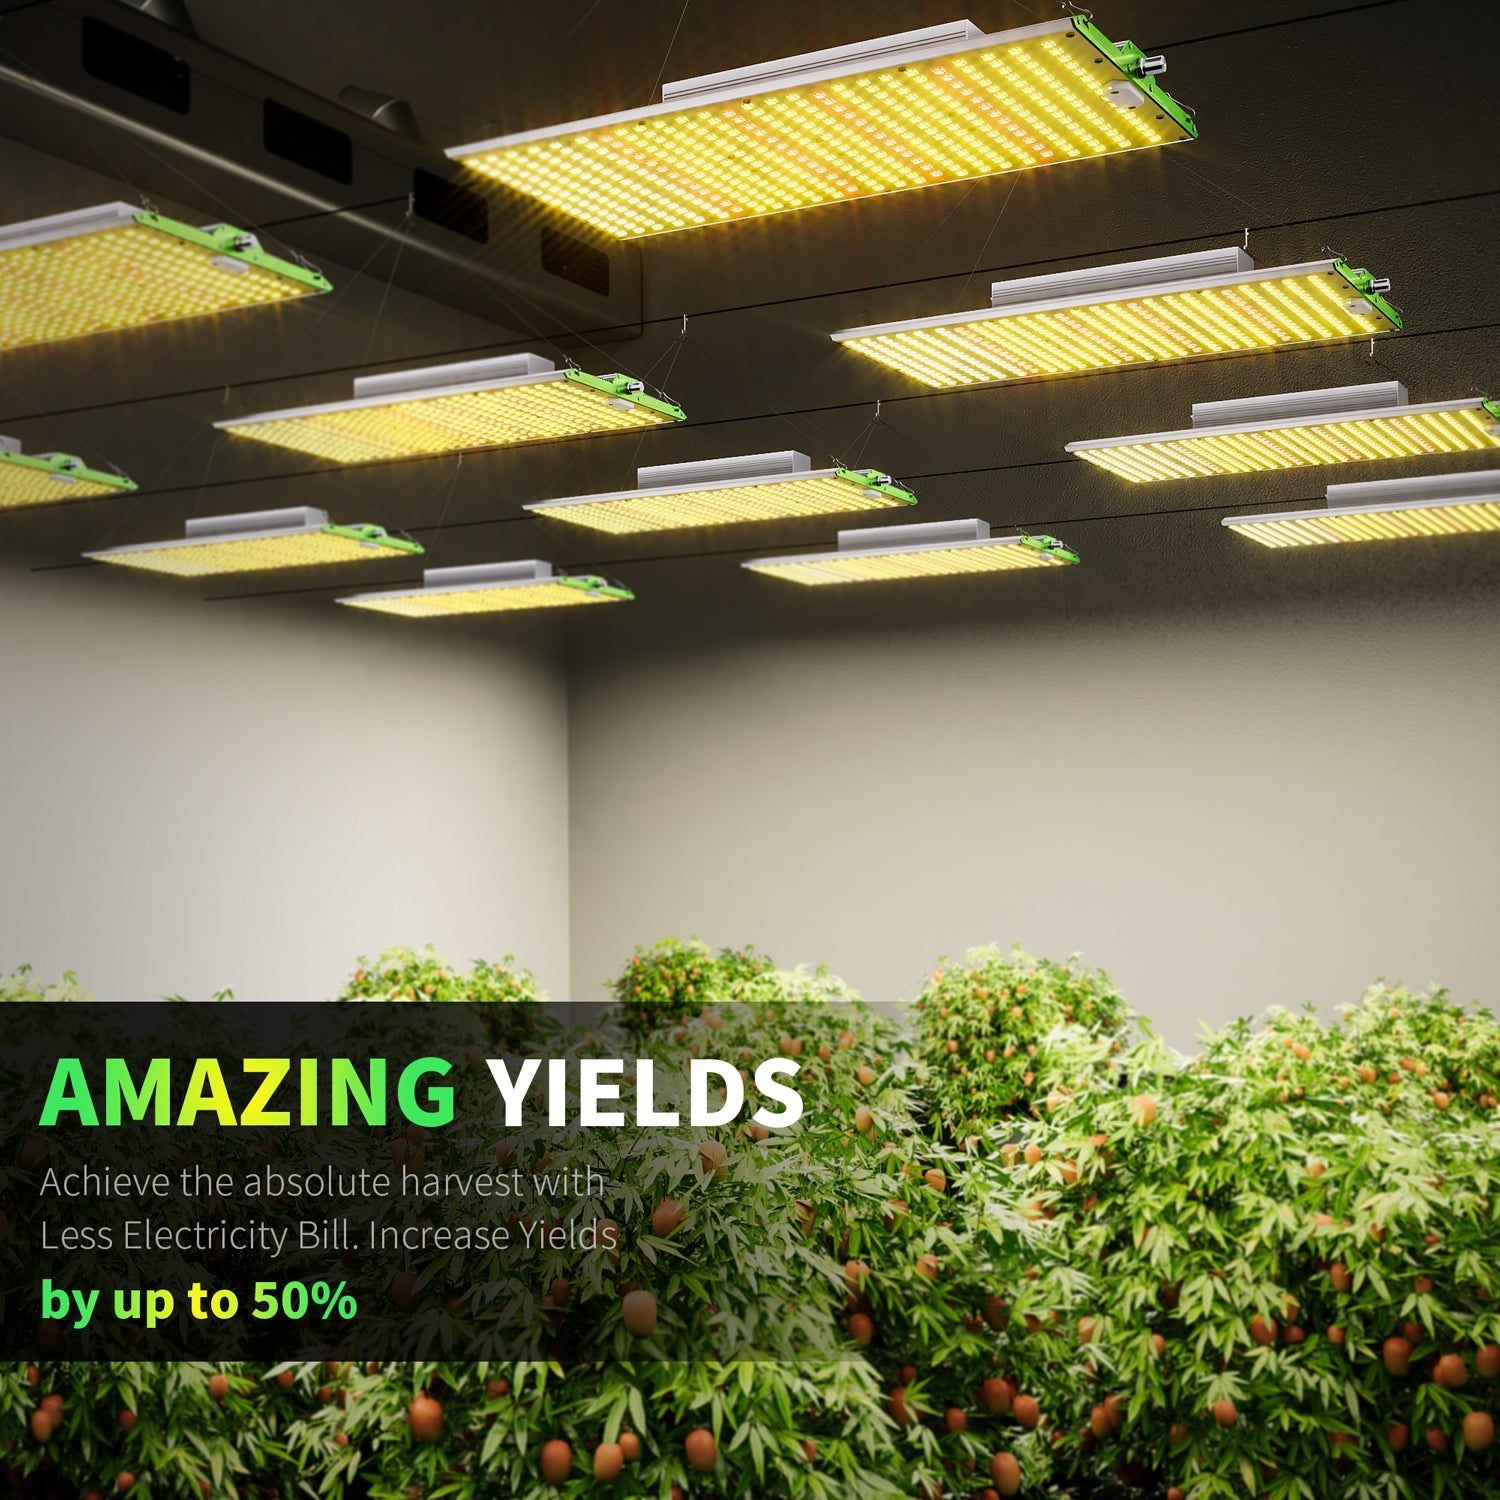 BESTVA Dimmable BP Series LED Grow Light with Samsung Diodes Full Spectrum Grow Lights for Hydroponic Indoor Plants Seedling Veg and Bloom